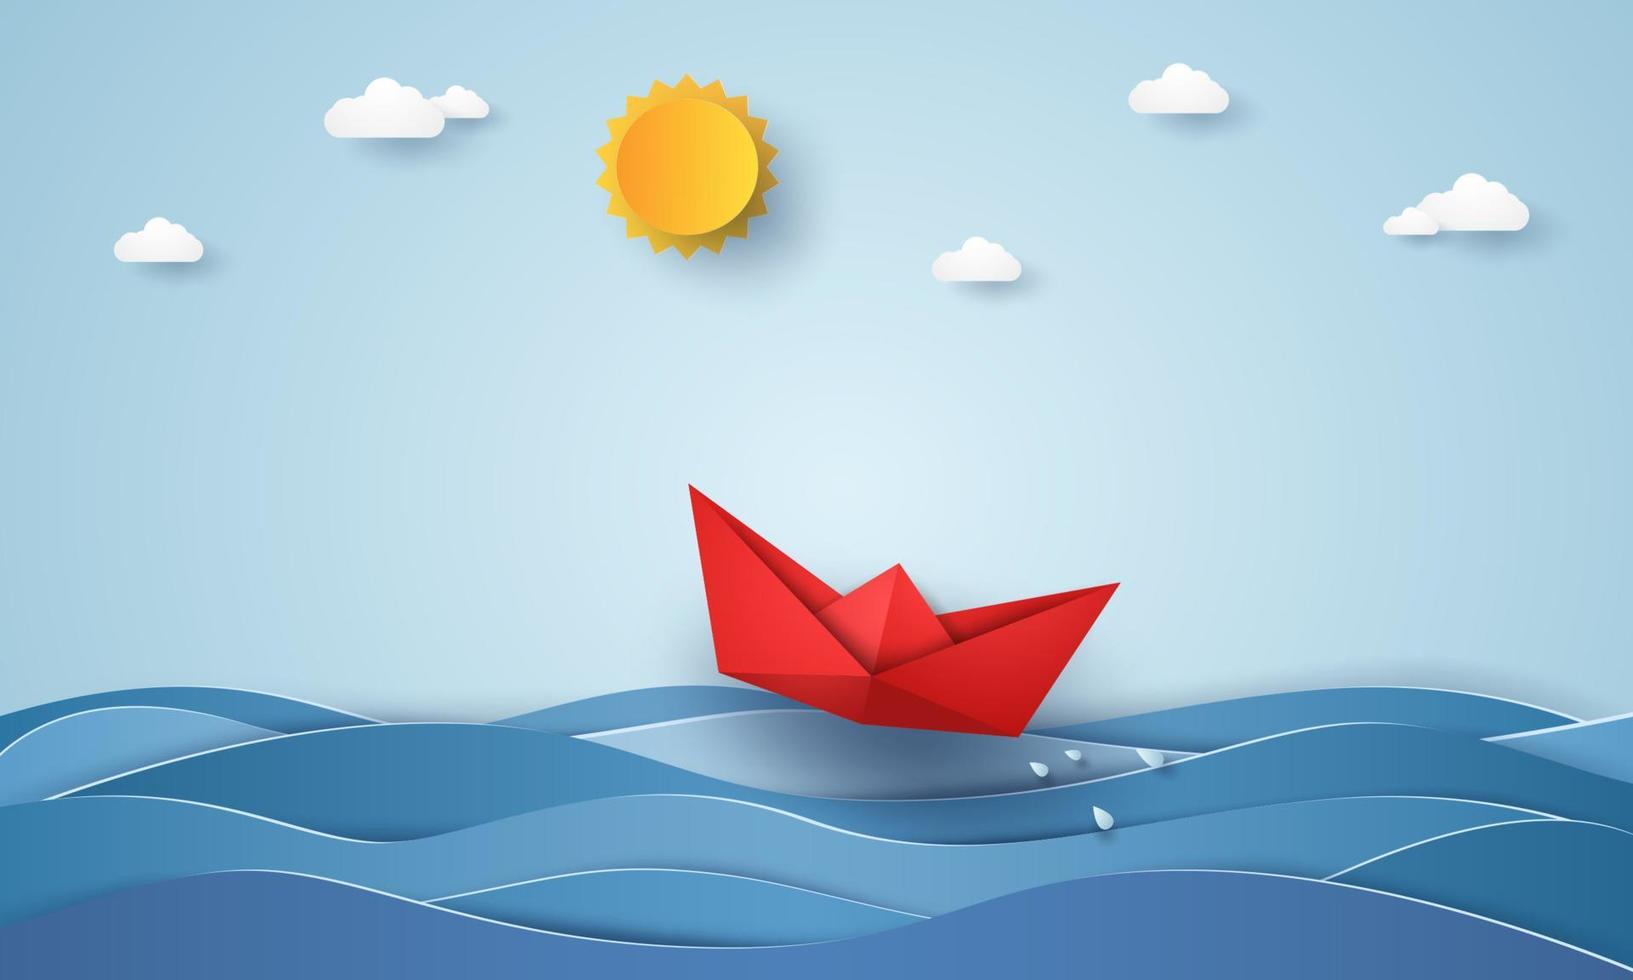 Origami boat sailing in blue ocean, paper art style vector